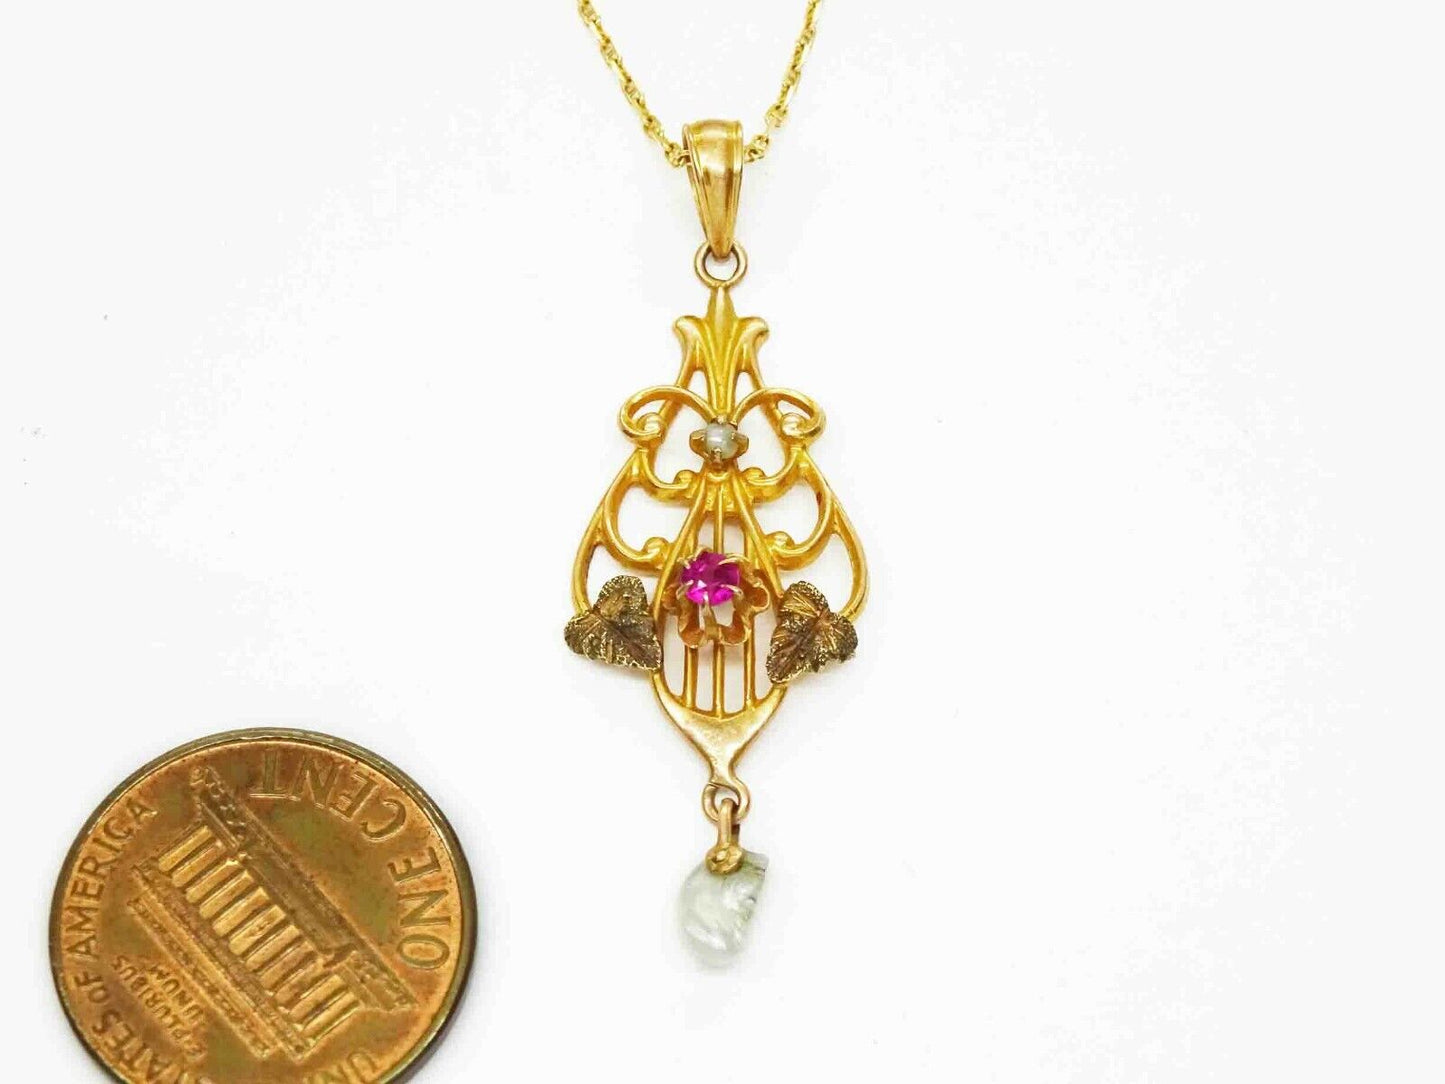 Vintage Pearl Drop Ruby Lavalier Pendant 10k Gold on Thin Chain 14k Gold 20"